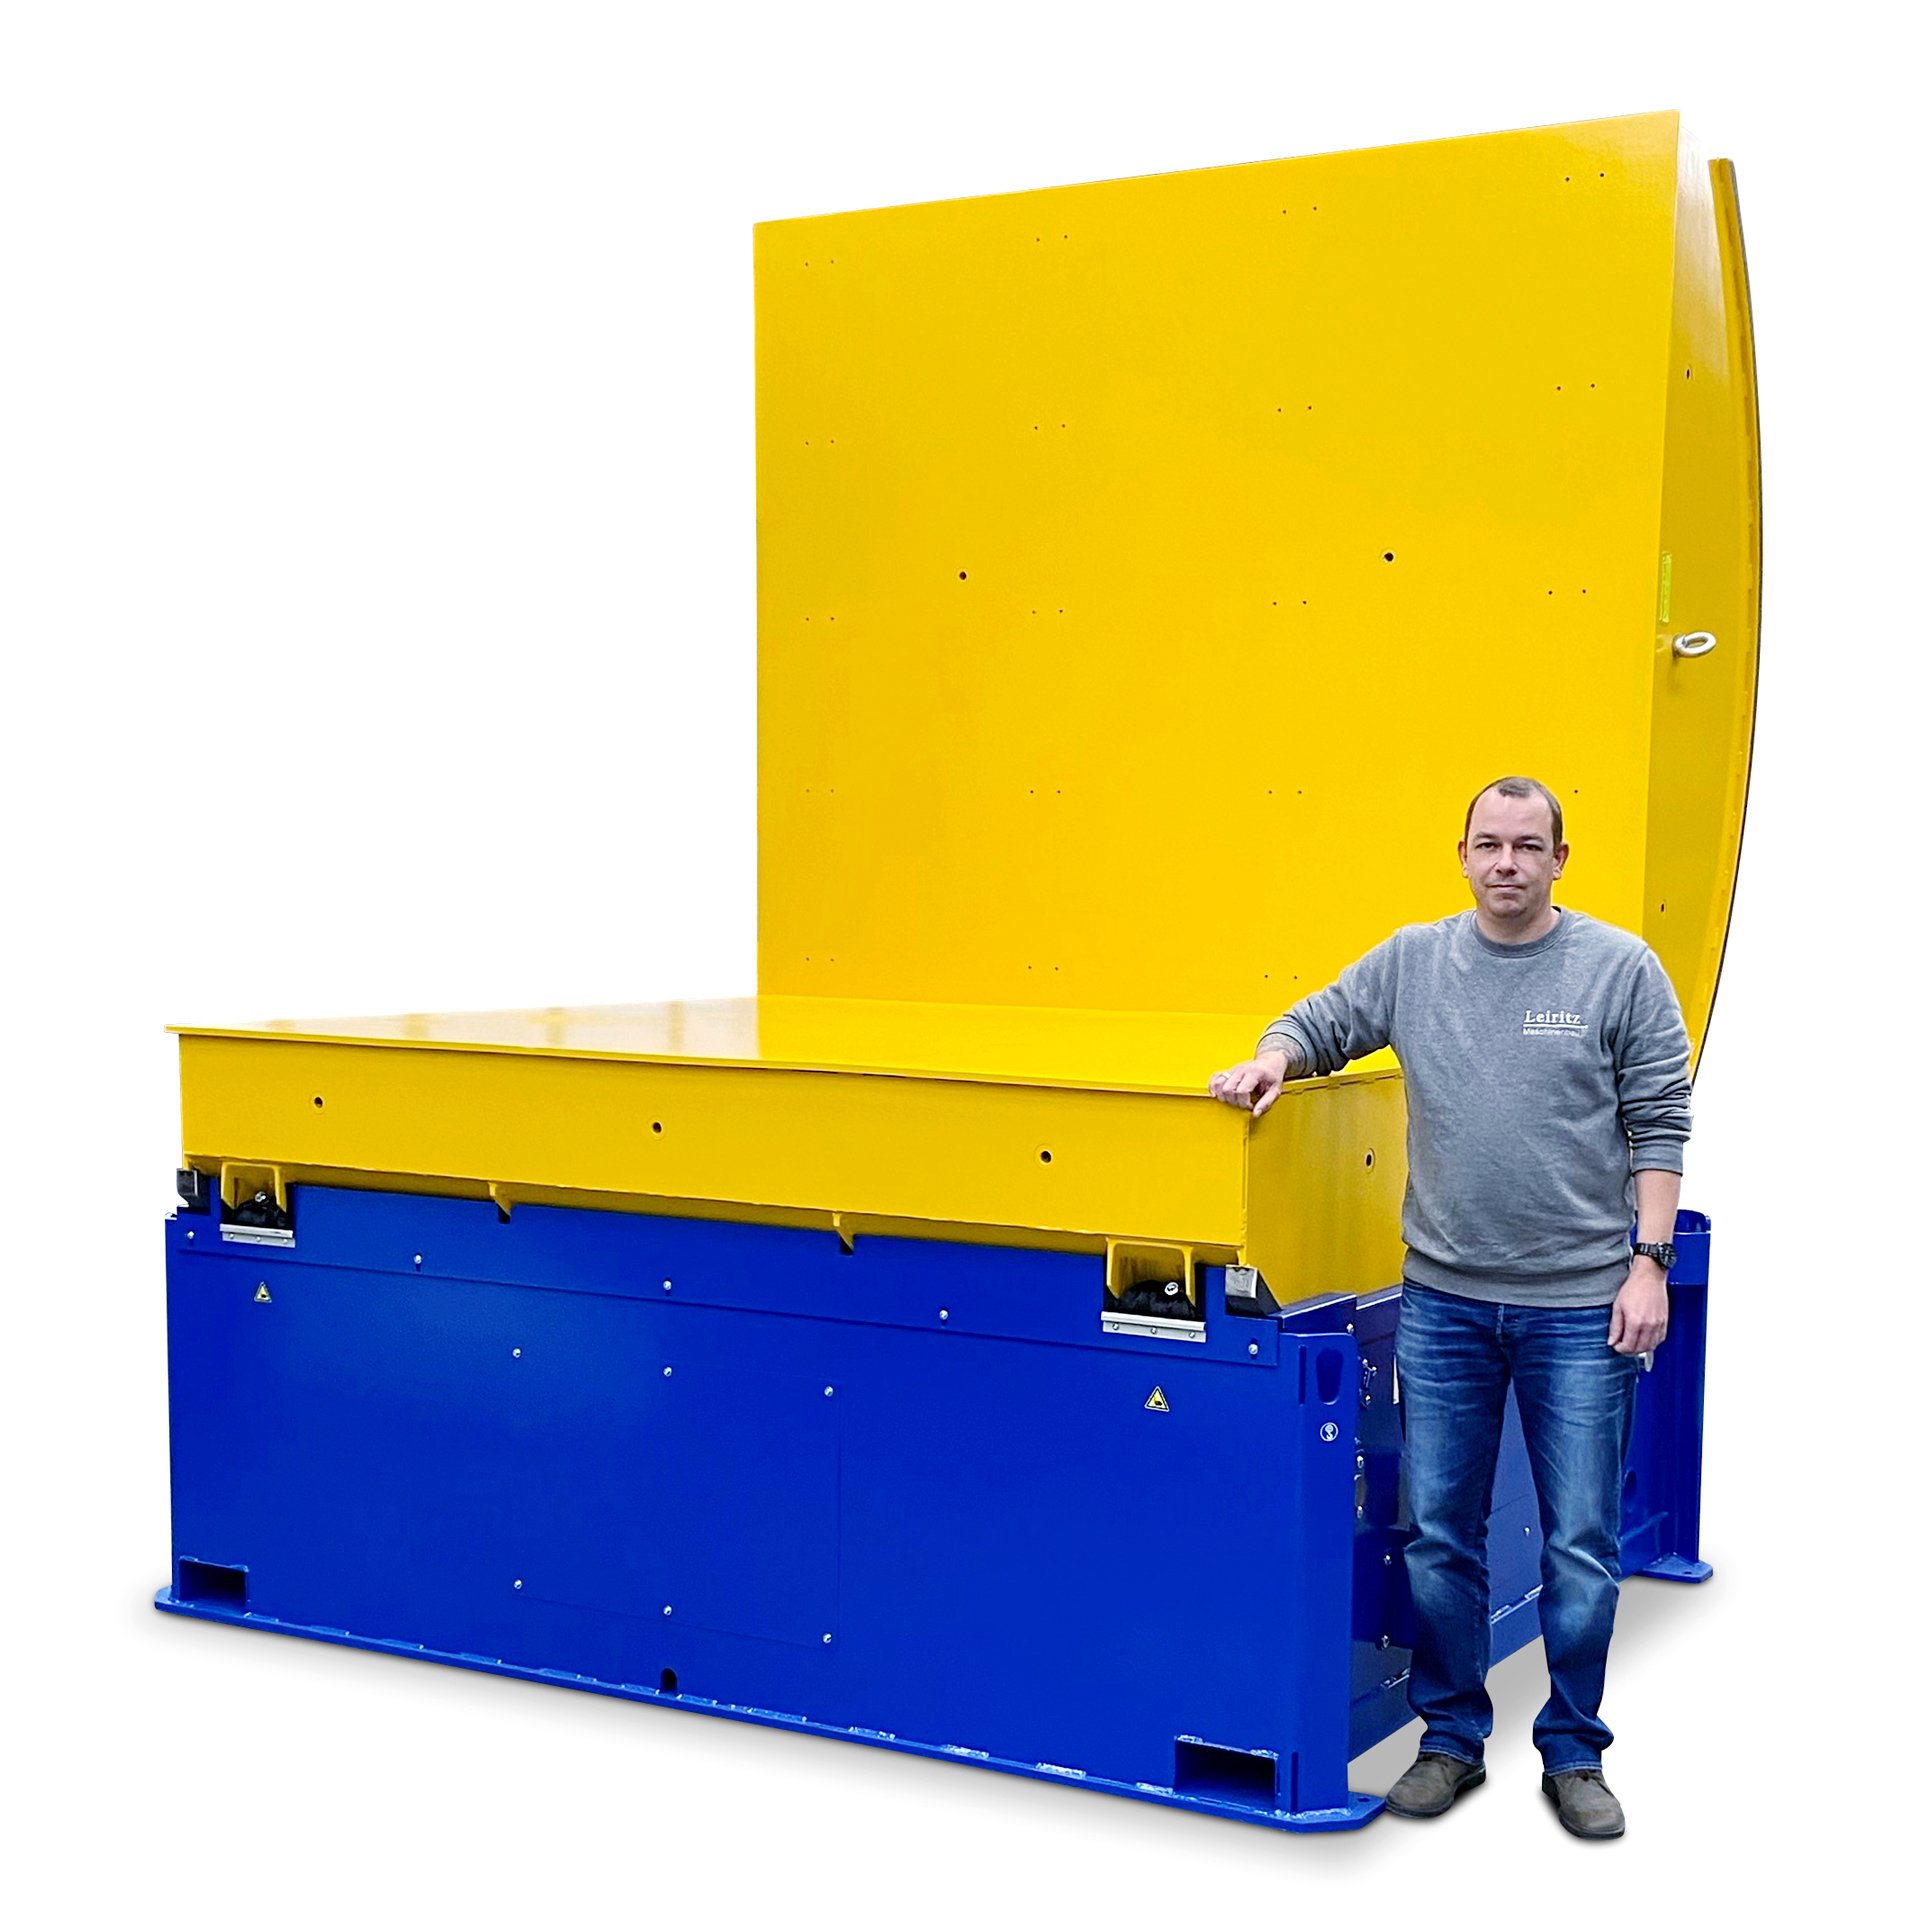 The Tool Mover Turnover Device from the manufacturer Leiritz are ready for 40 to 80 tons.